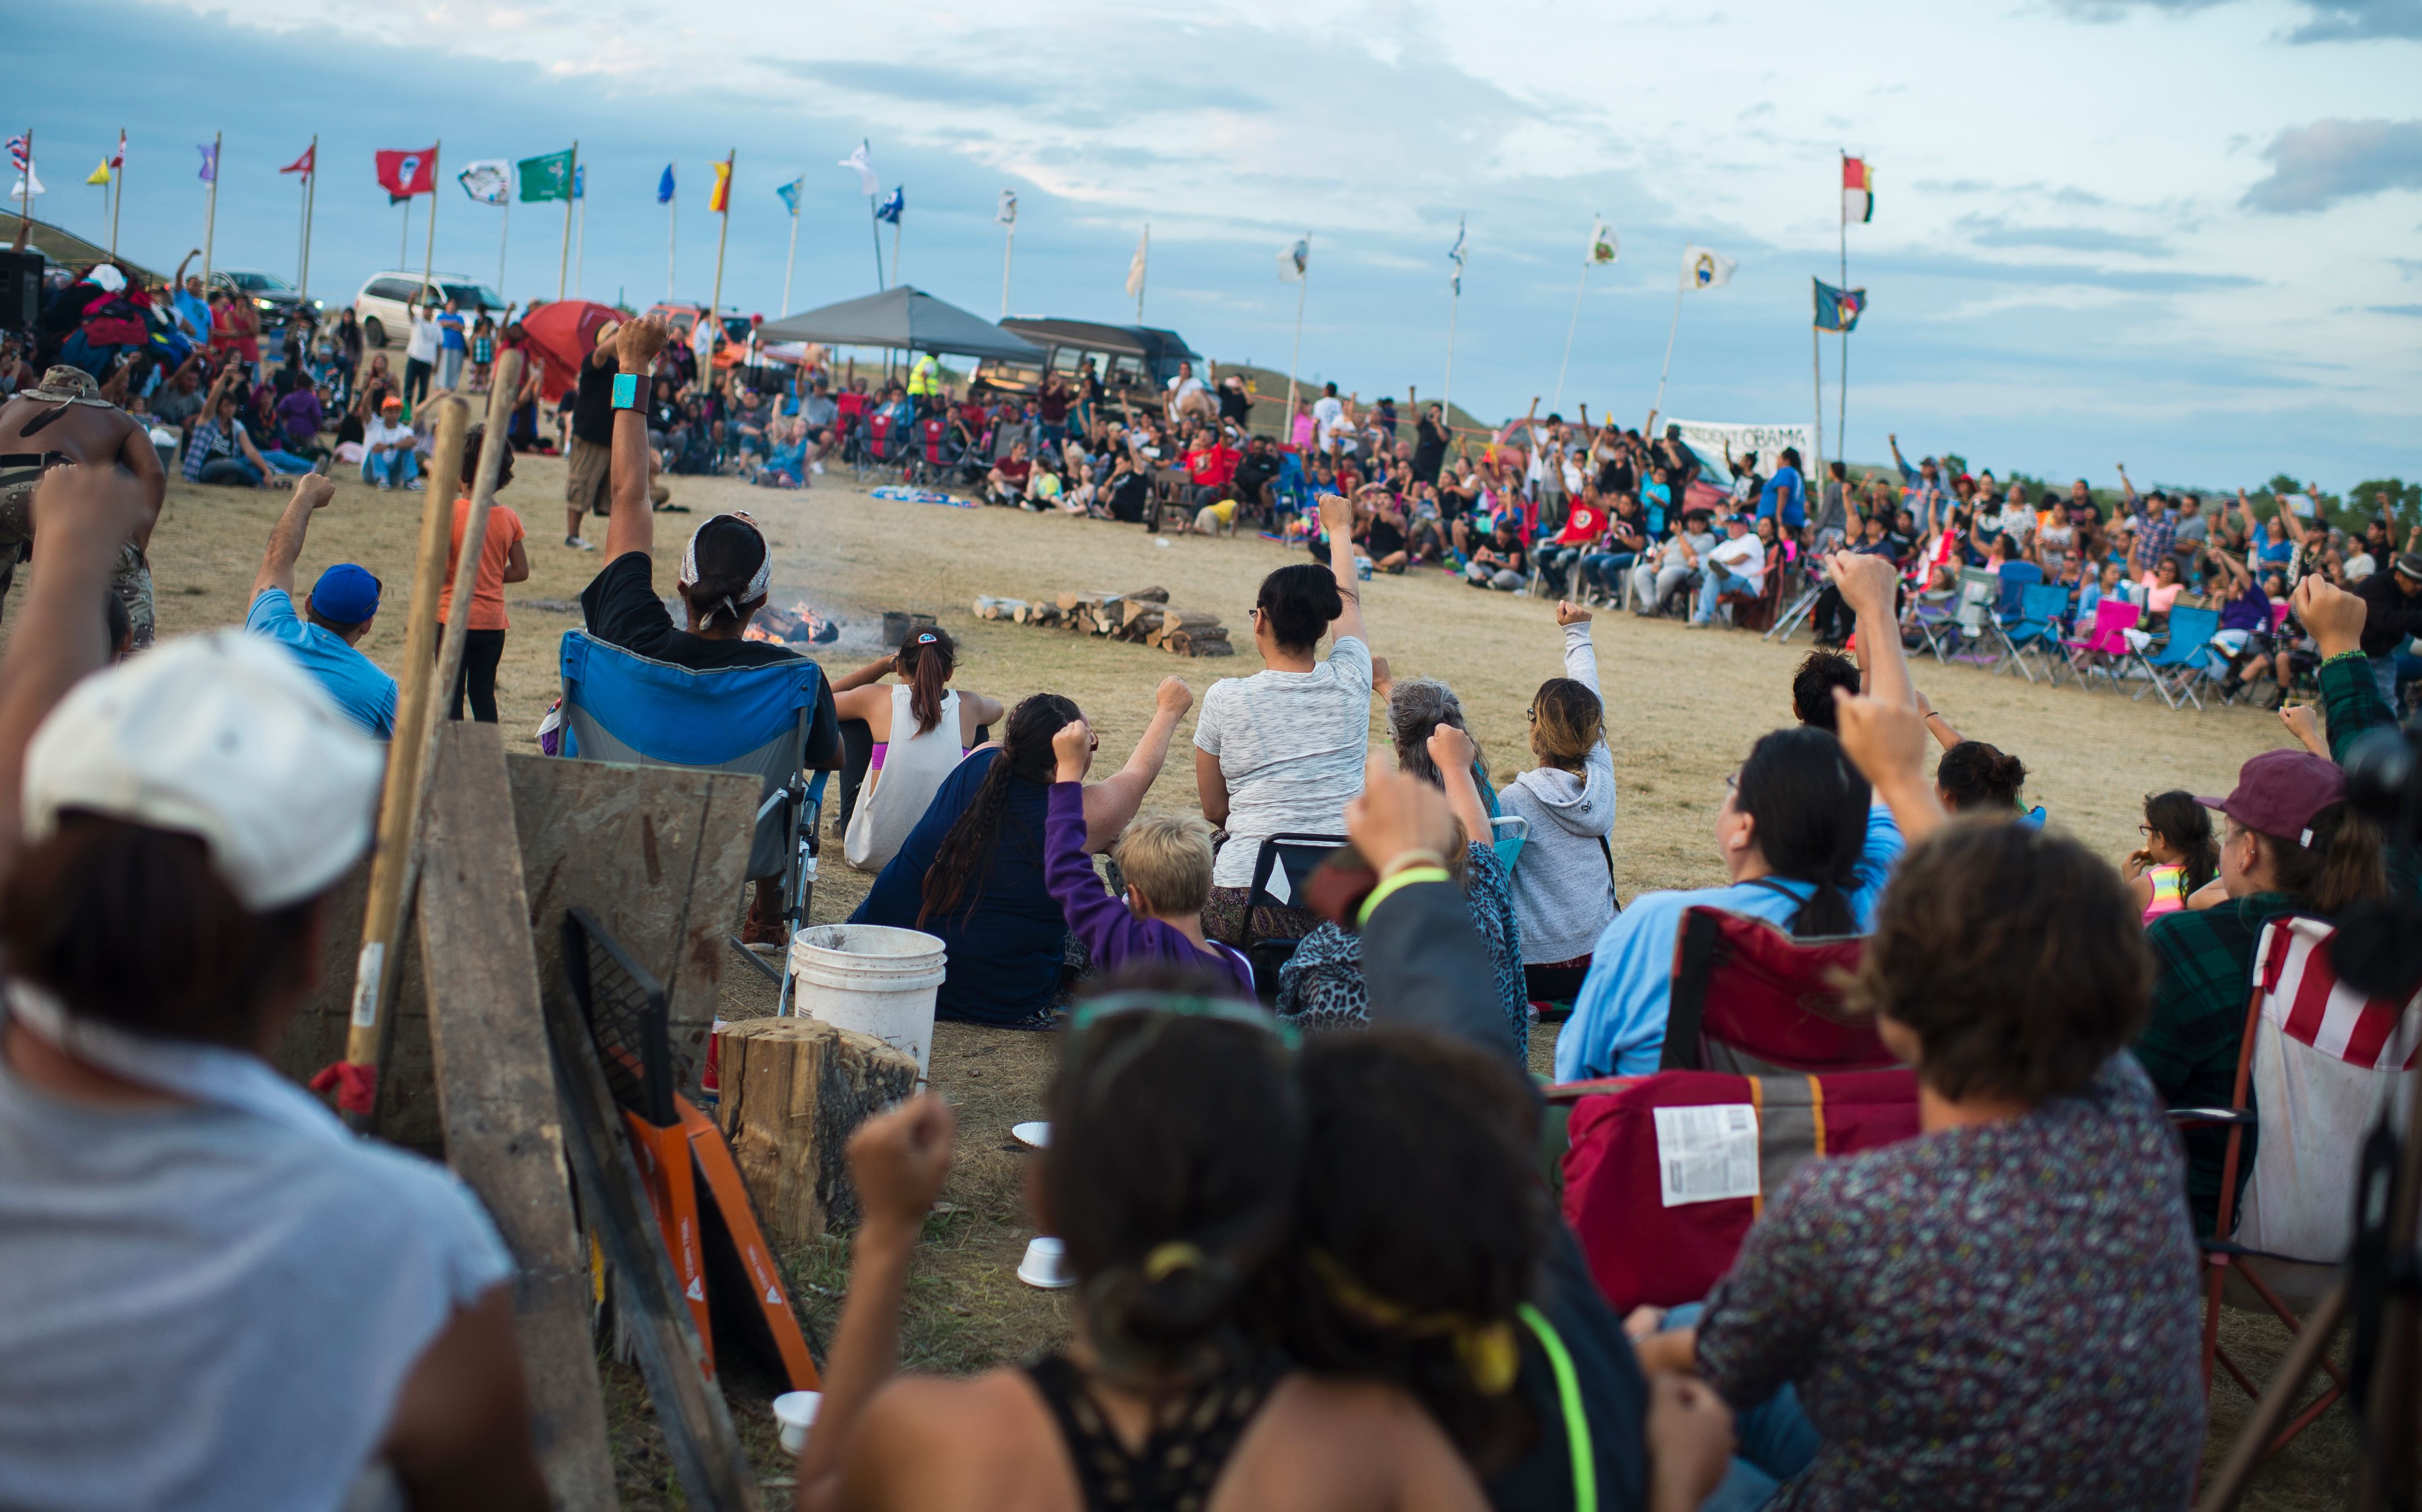 Members of the Standing Rock Sioux tribe and their supporters gather in a circle in the center of camp to hear speakers and singers, at a protest encampment near Cannon Ball, North Dakota where members of the tribe and their supporters have gathered to voice their opposition to the Dakota Access Pipeline (DAPL).